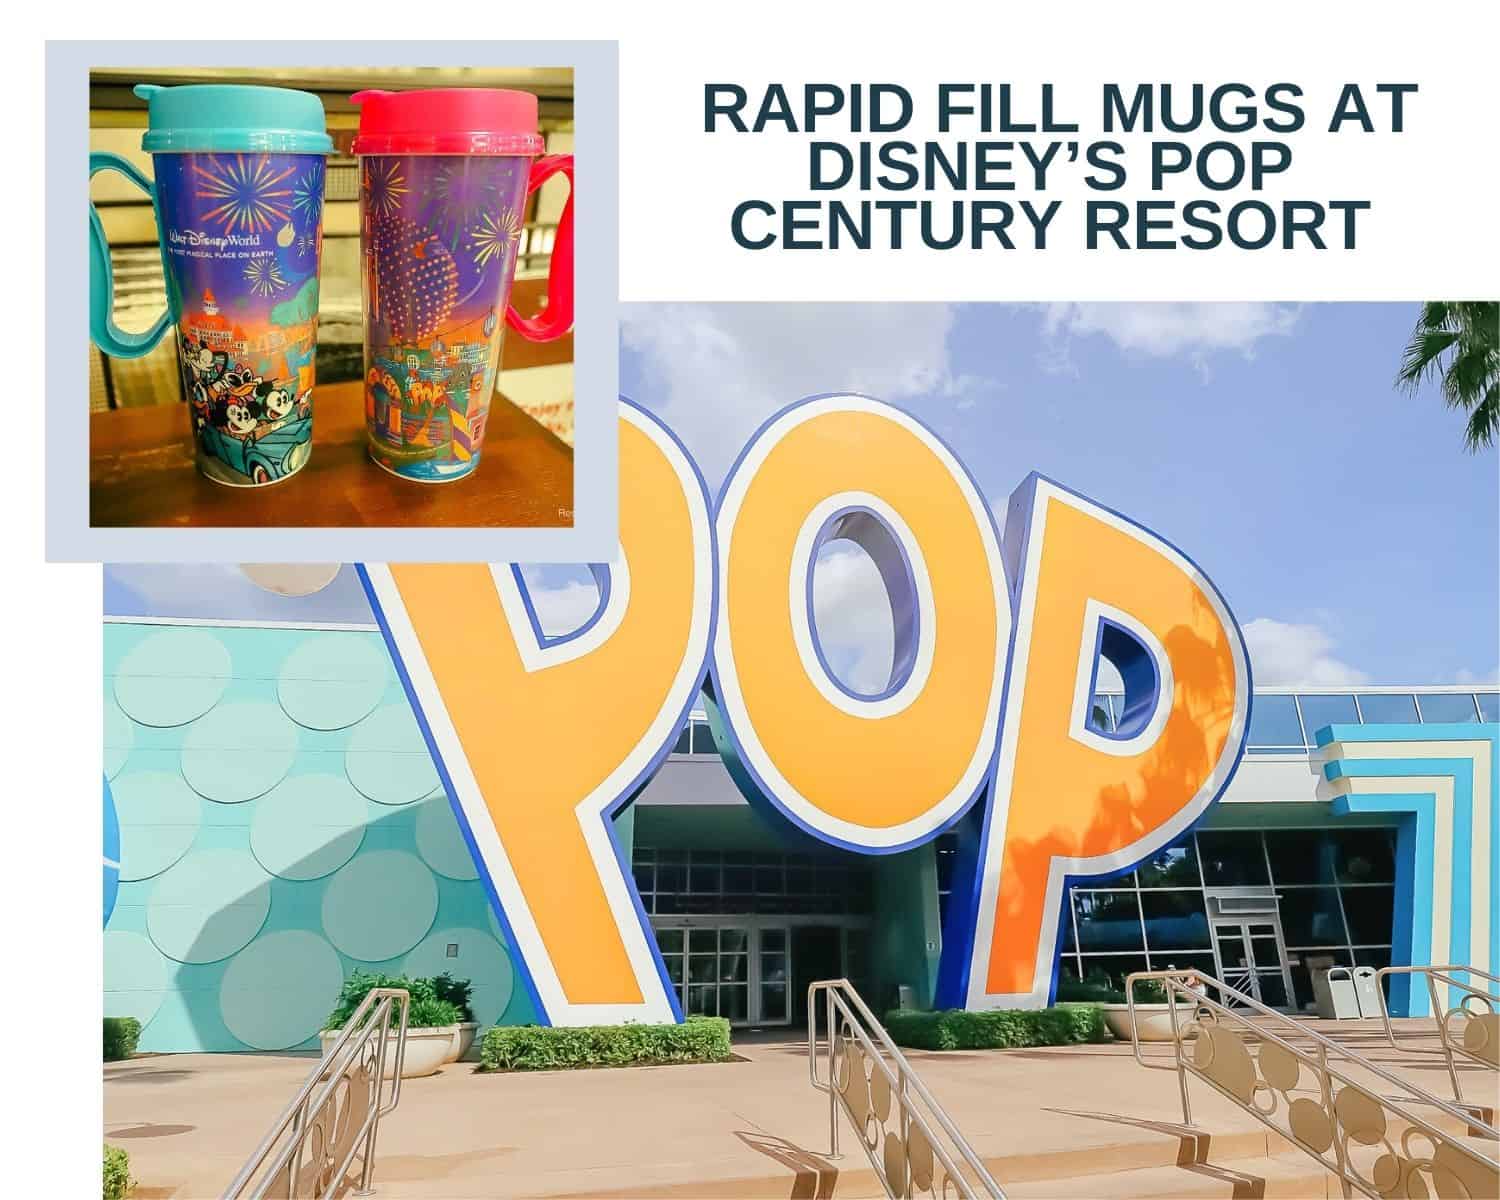 The 2 Places to Refill Rapid Fill Mugs at Disney’s Pop Century Resort